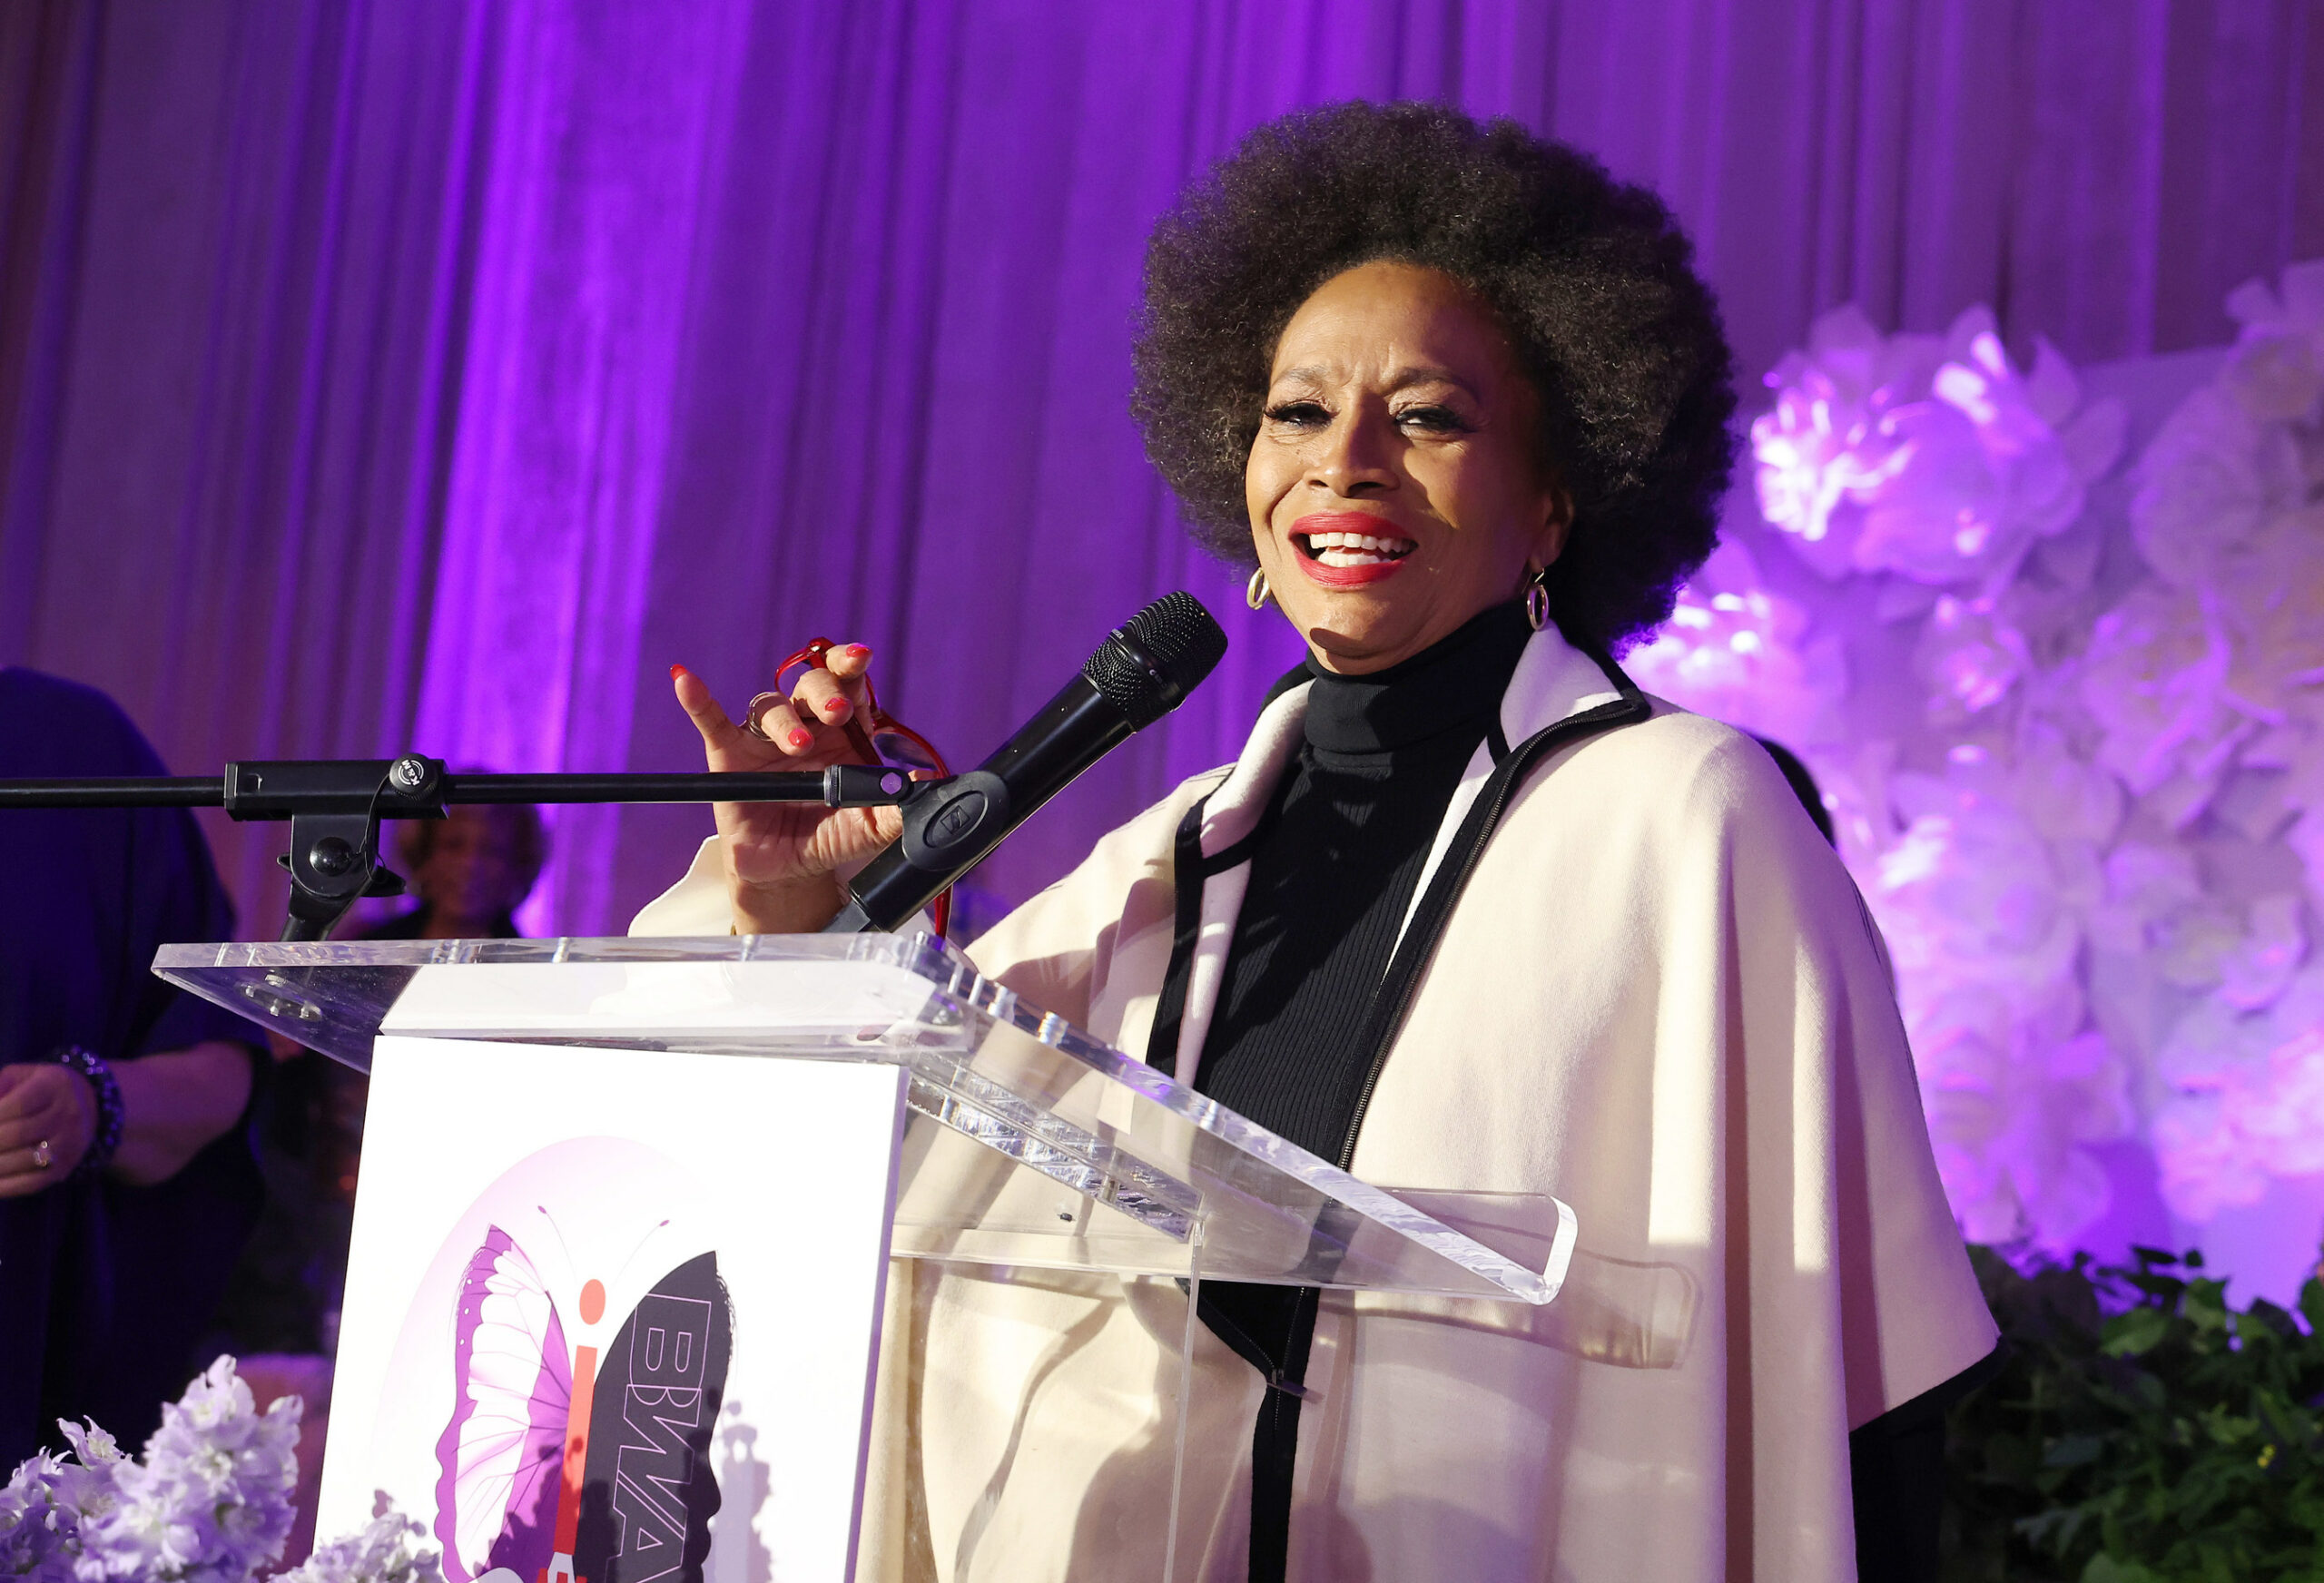 Achievement and Activism: The Black Women’s Agenda, Inc. Hosts Its 45th Annual Symposium Town Hall and Awards Luncheon